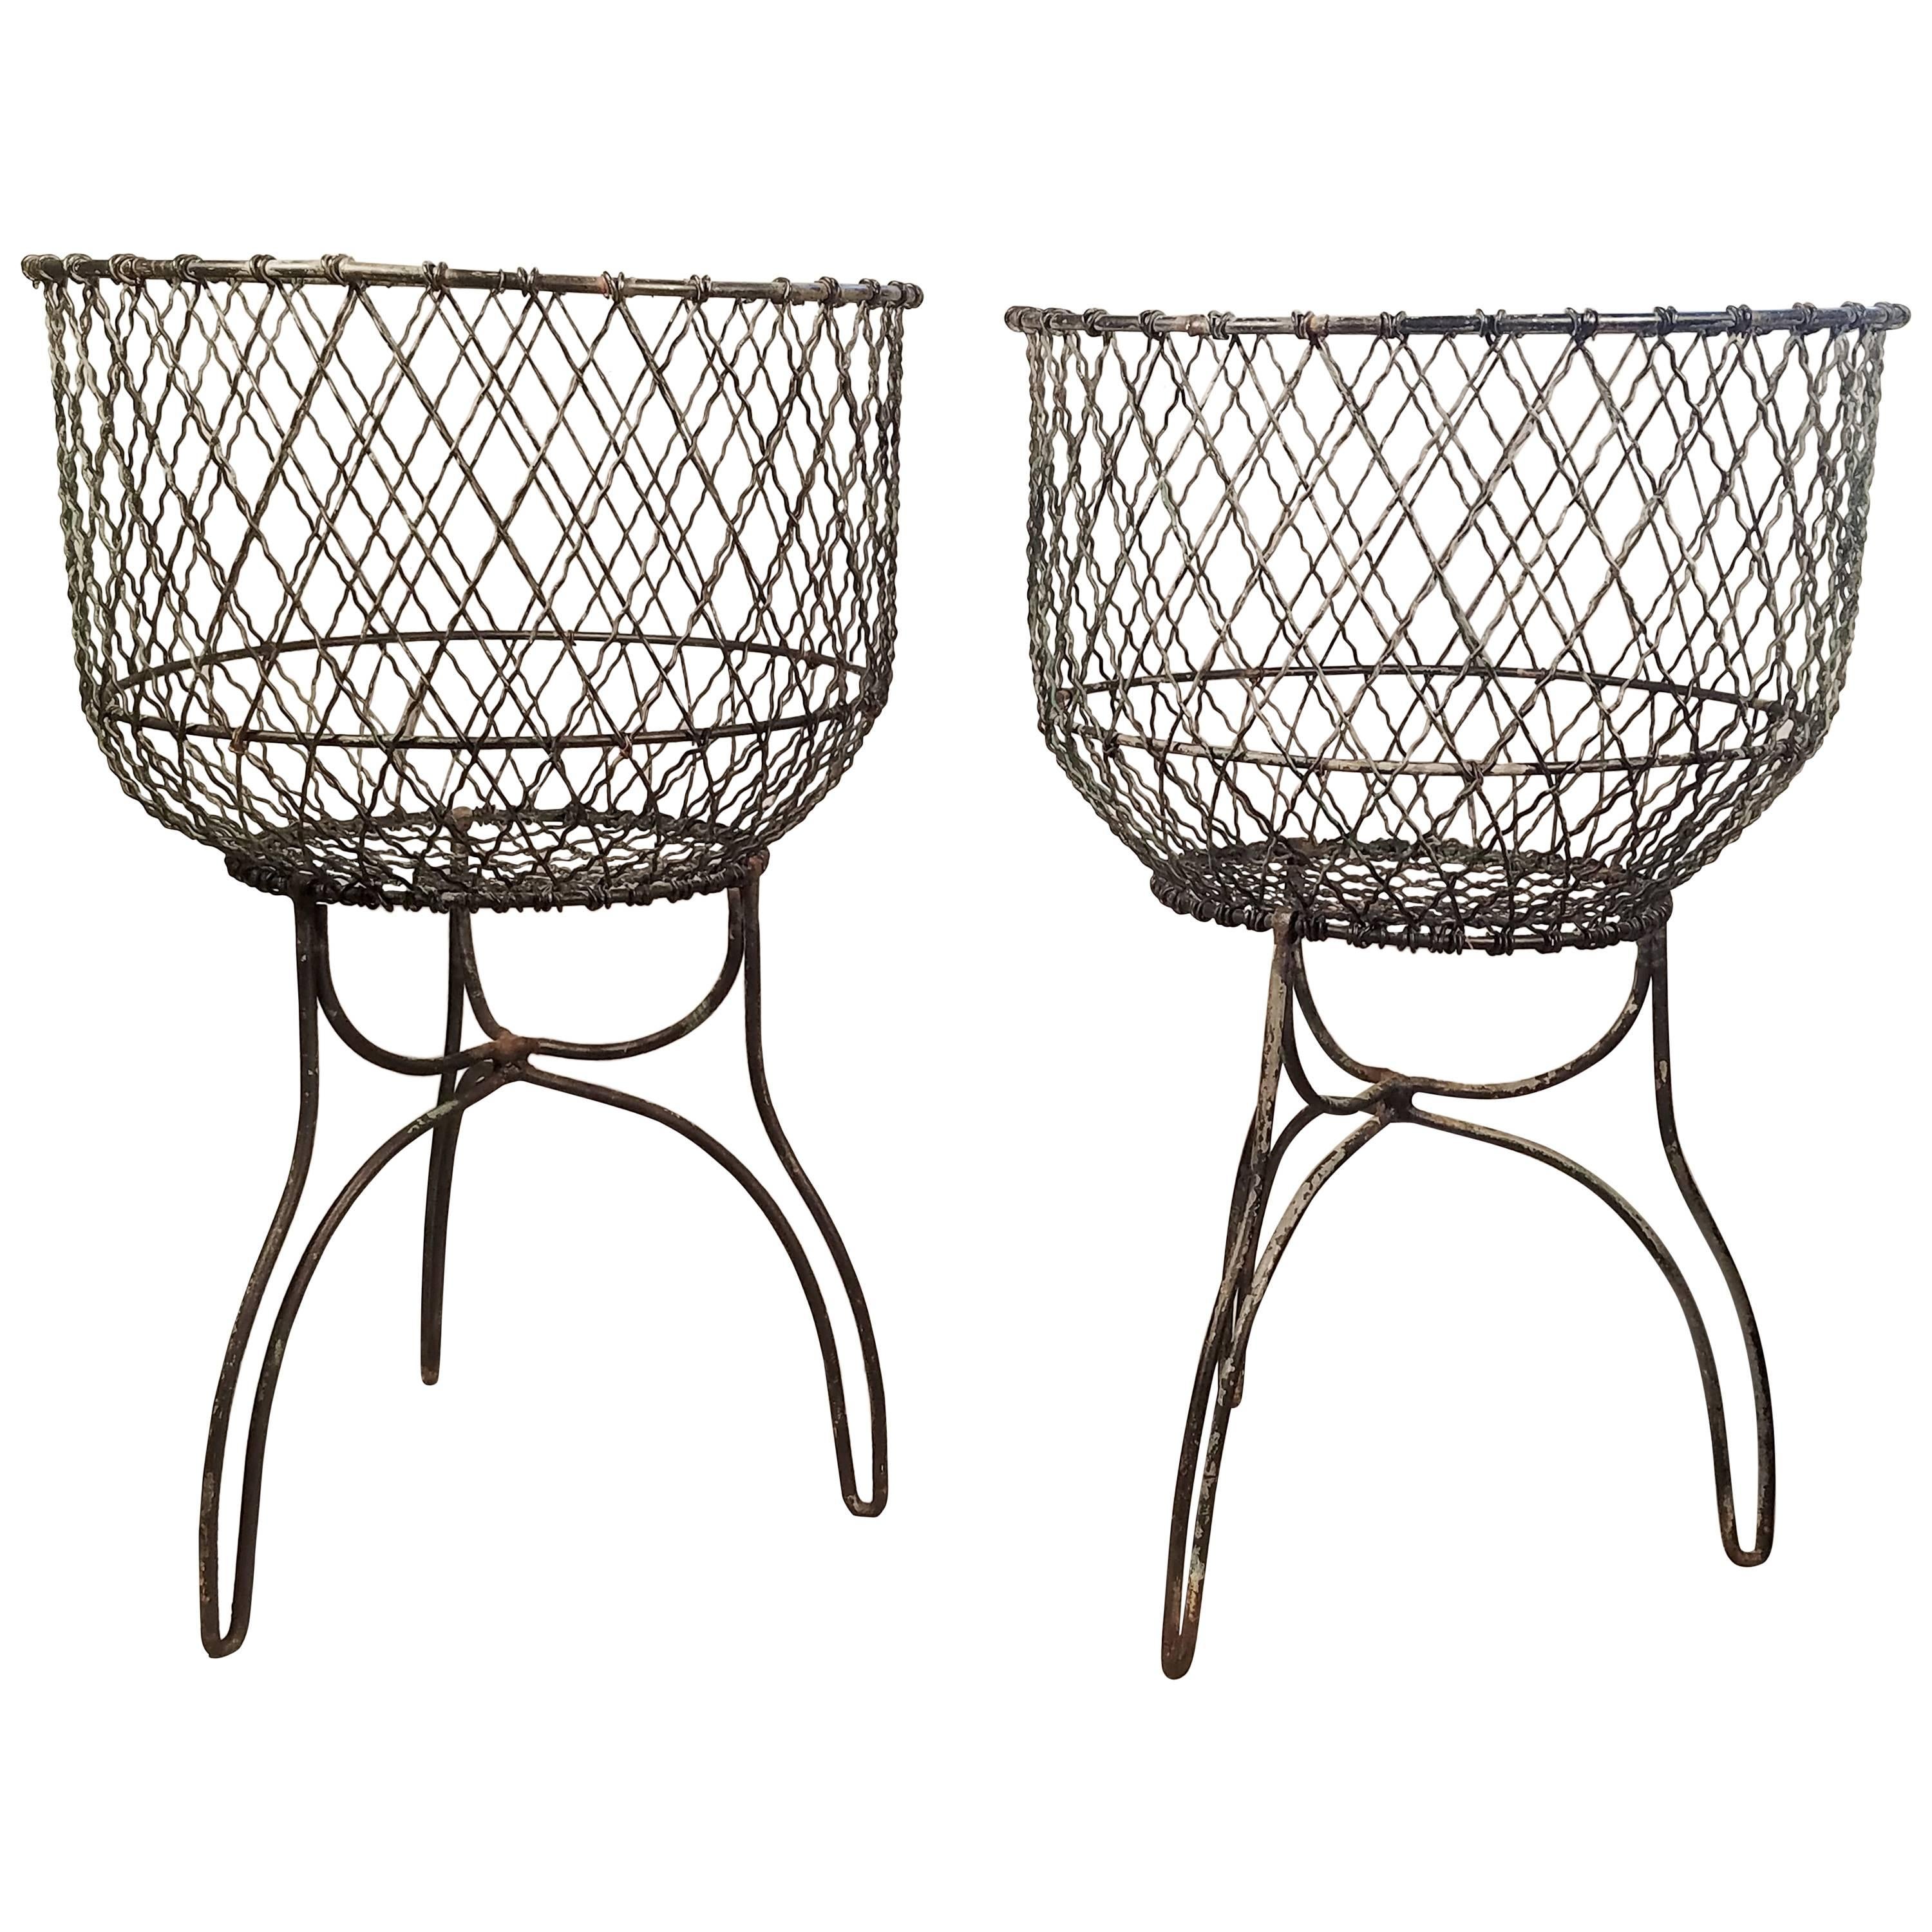 Pair of Antique American Victorian Wire Baskets, Late 19th-Early 20th Century